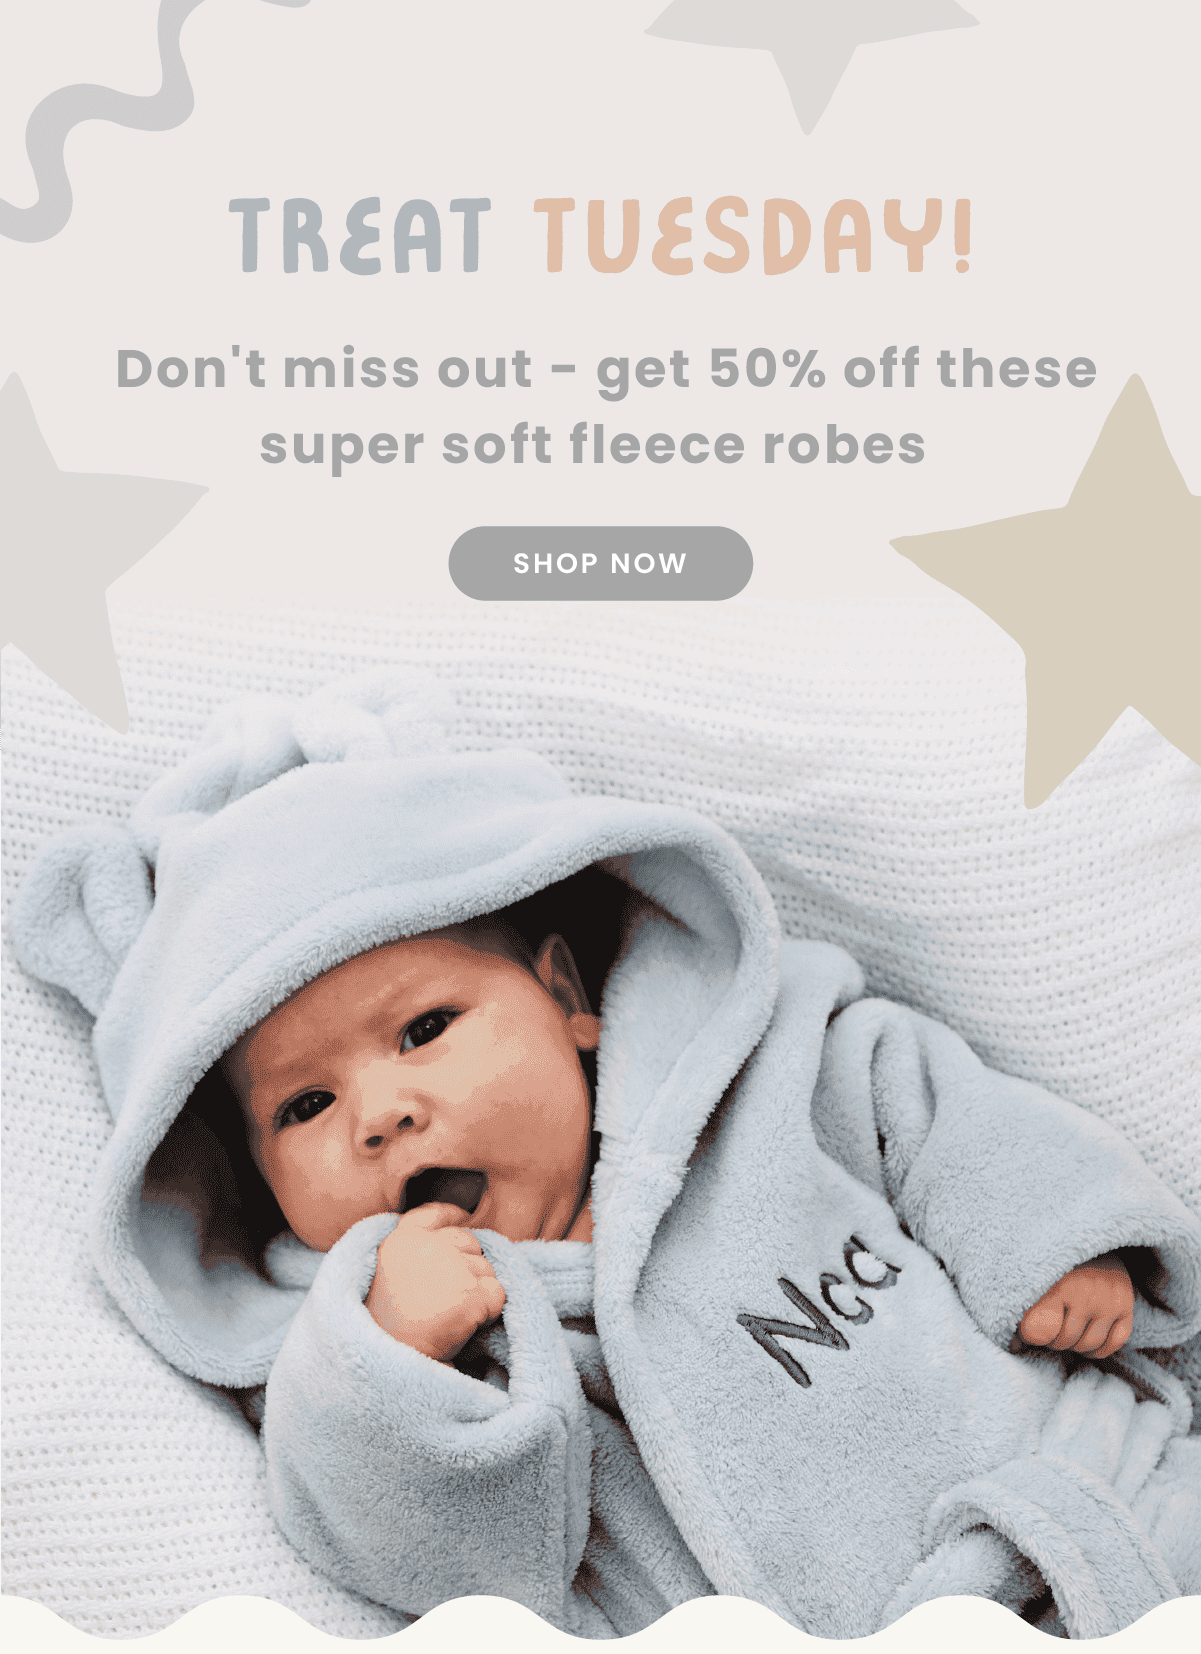 Treat Tuesday! Get 50% off these super soft fleece robes